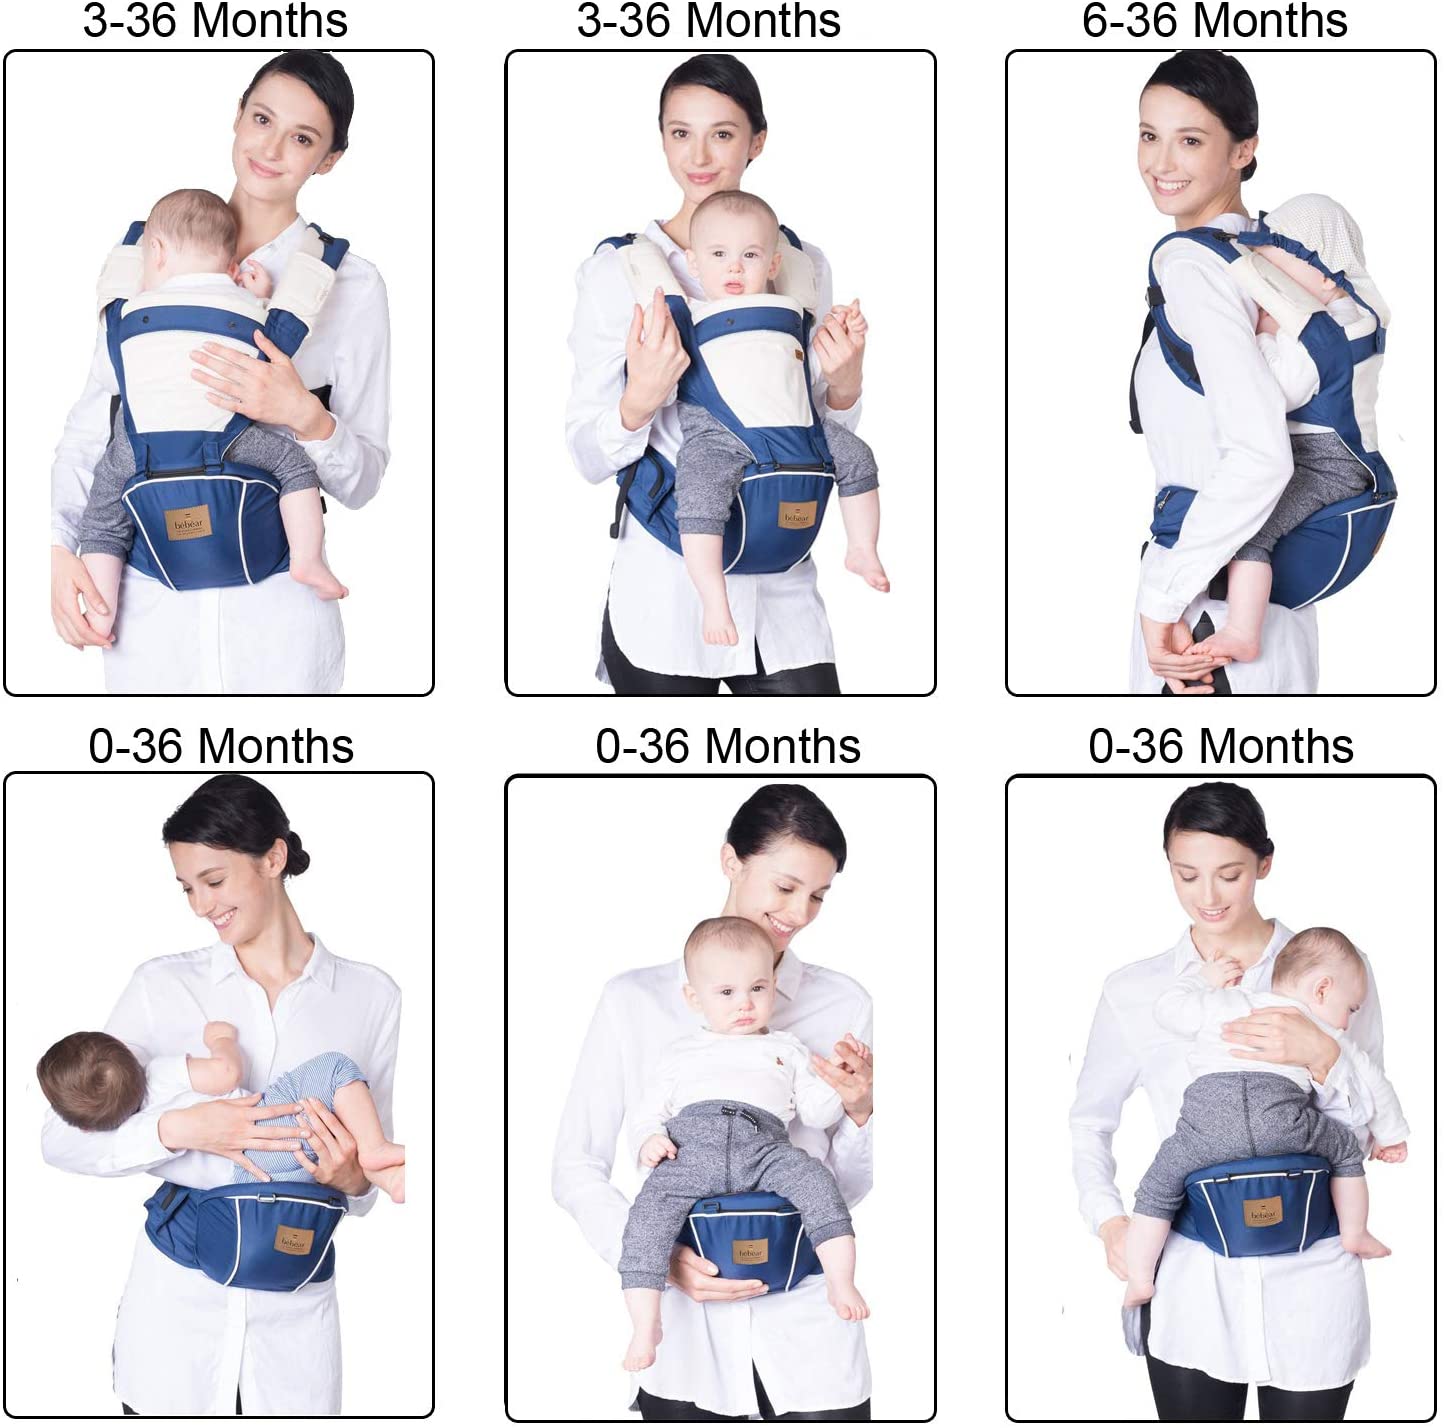 Bebamour Baby Carrier for 0-36 Months - Rosa